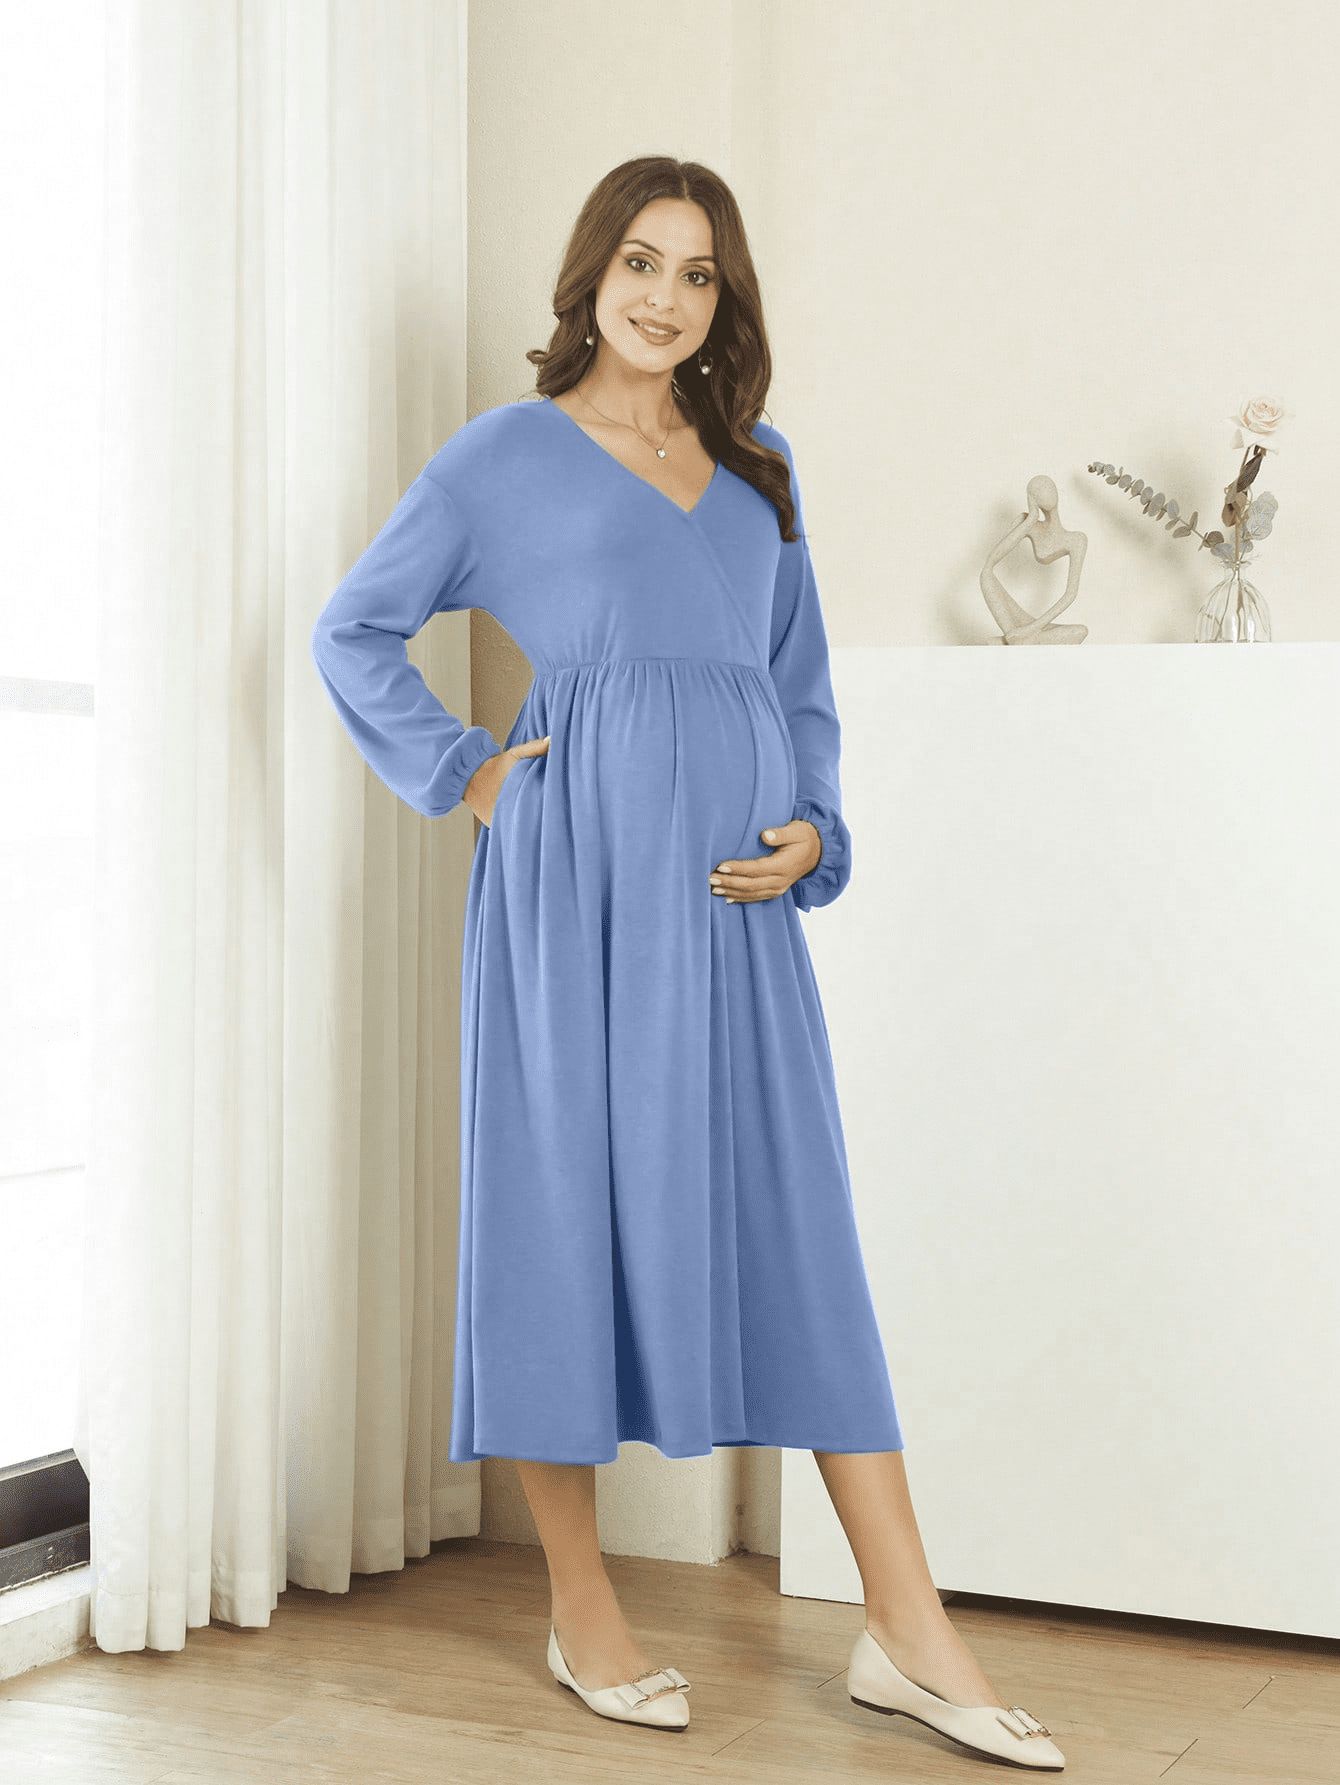 PCEAIIH Women's Long Sleeve Maternity Dress Clothes Ruched Pregnancy ...